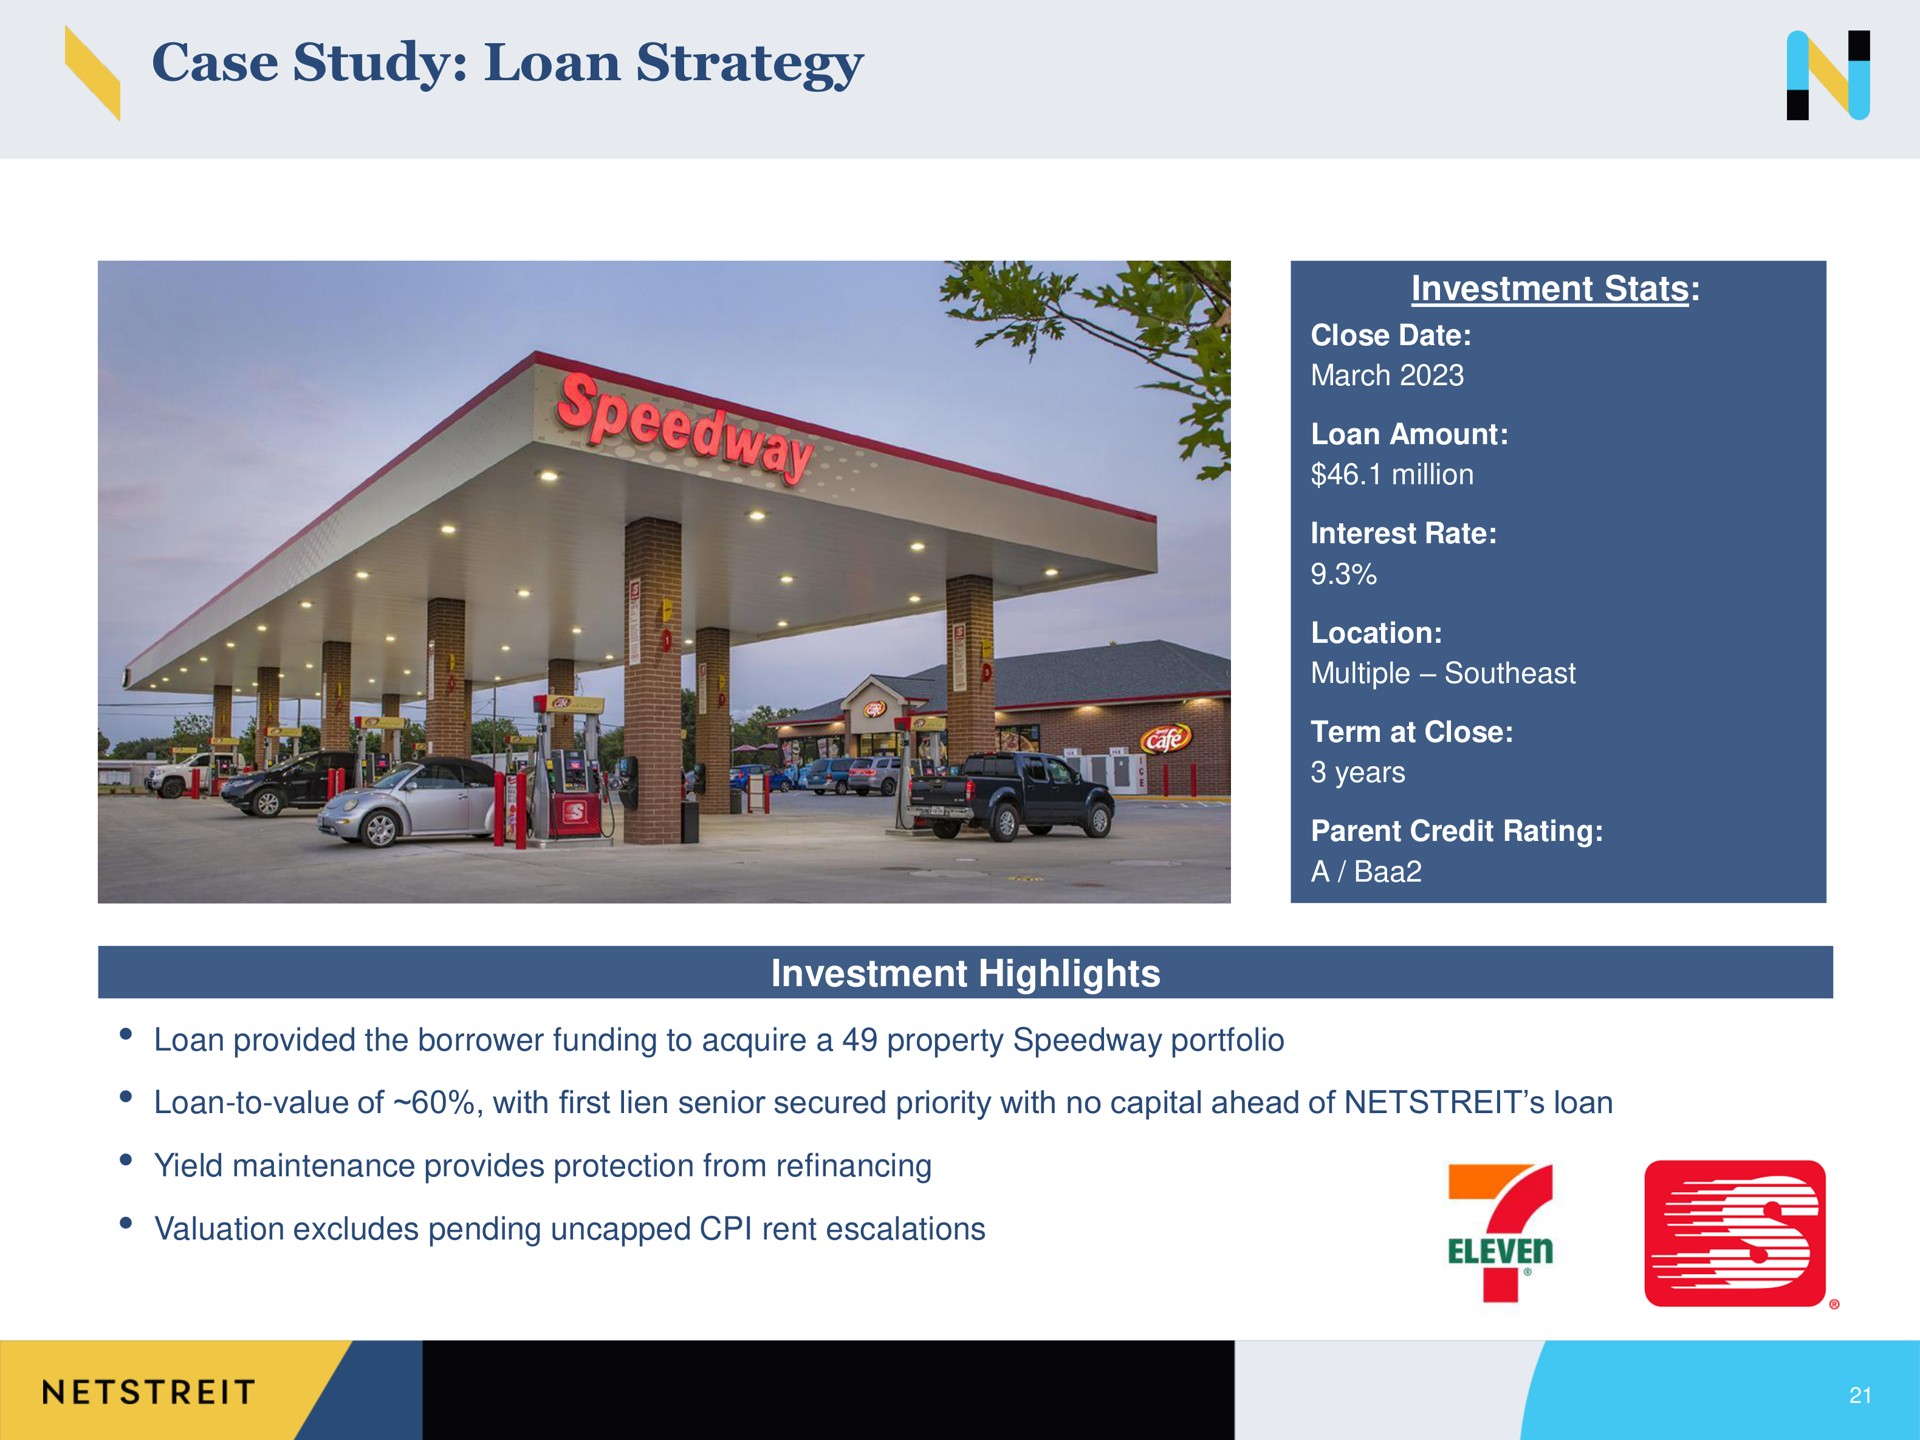 case study loan strategy investment investment highlights | Netstreit